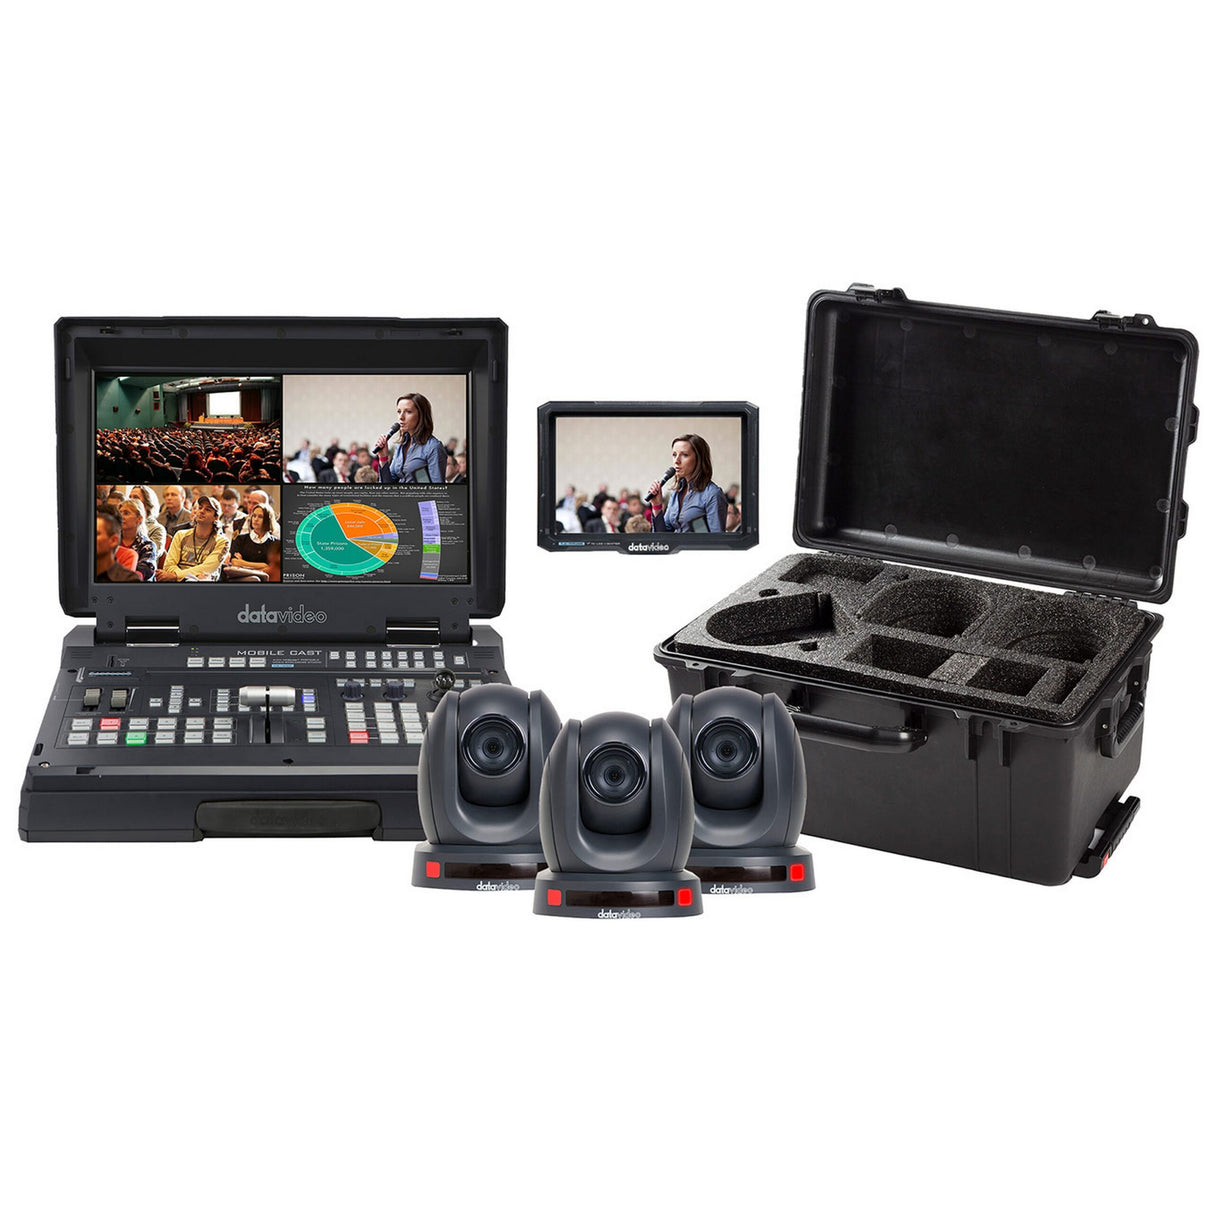 Datavideo HS-1600T-3C140TCM Portable Video Studio with Streaming/Recording and Carrying Case